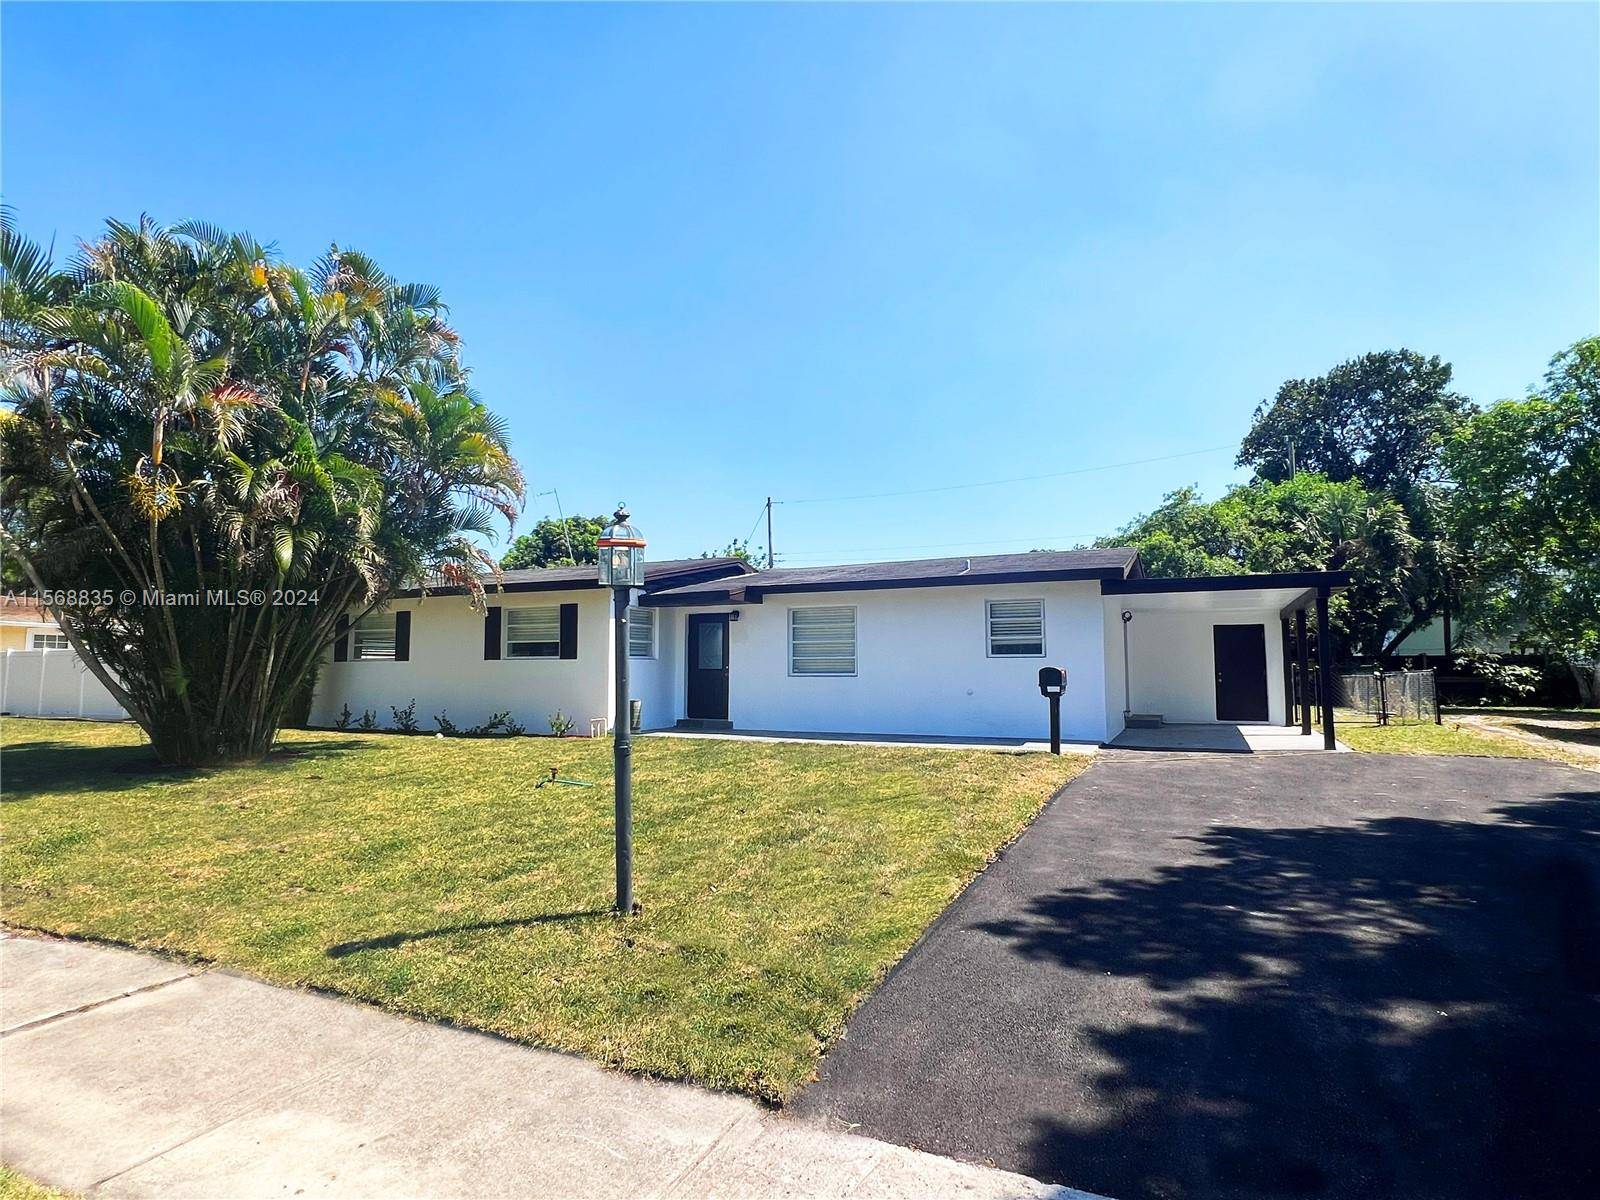 Must see ! Don't miss this opportunity to move into this newly renovated 3bed 2bath home with screened patio, refreshing pool and plenty of room to expand.